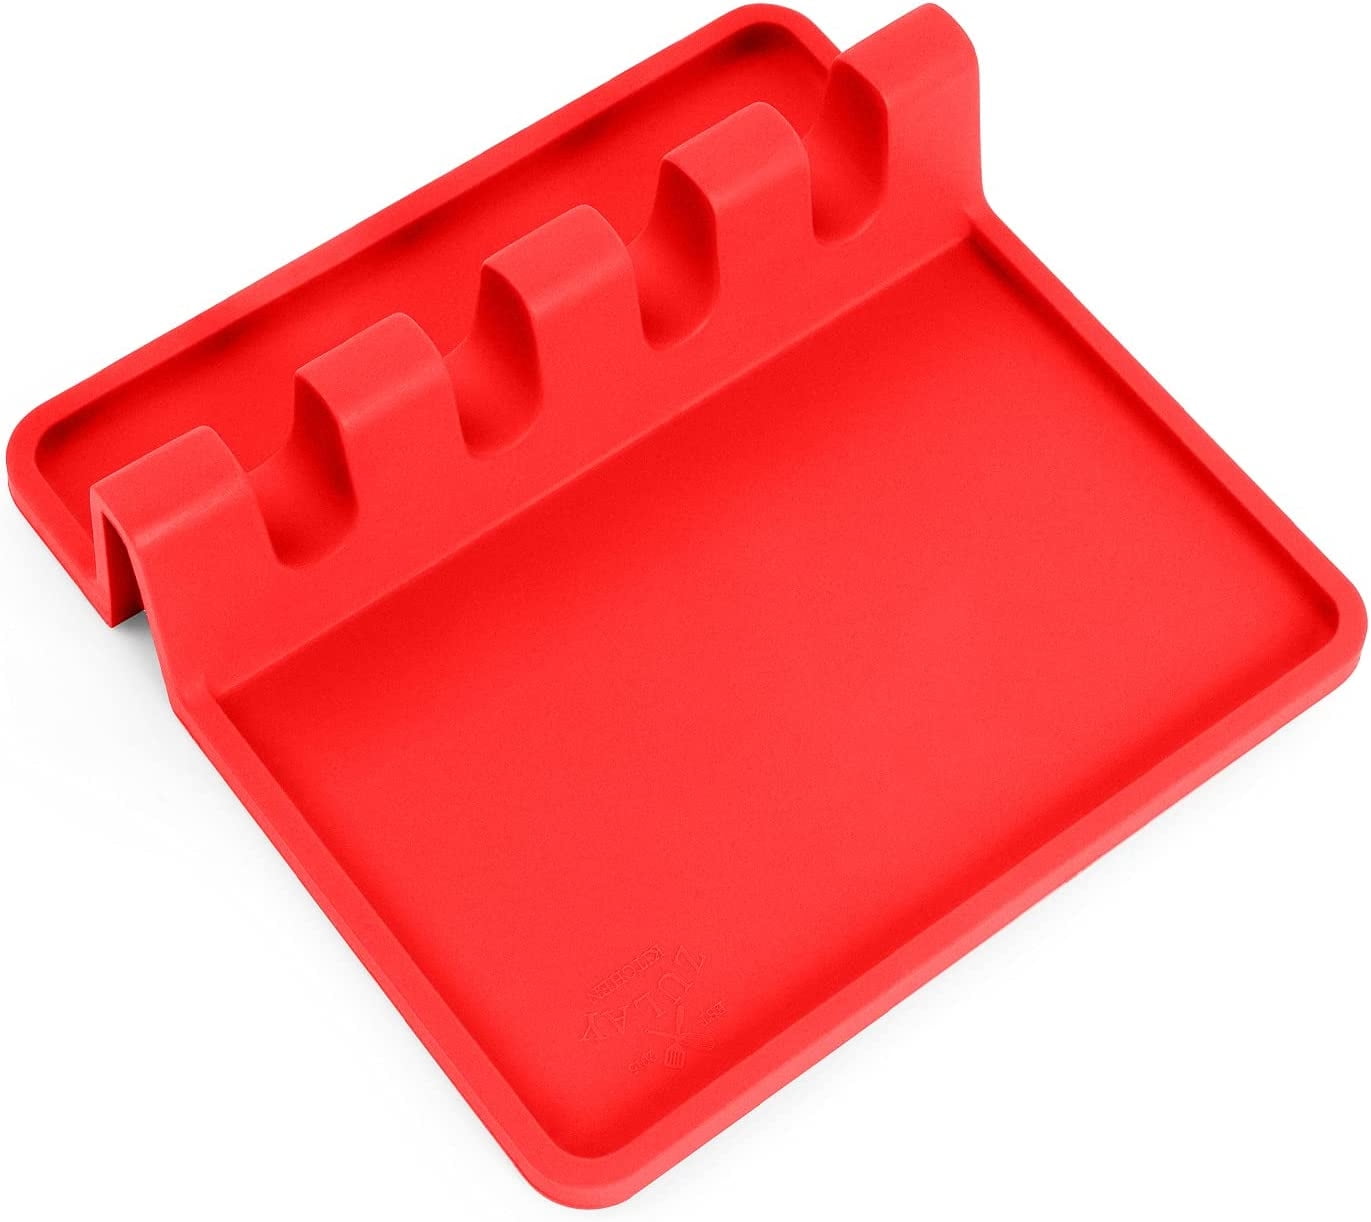 Zulay Kitchen Silicone Multipurpose Tray Holder - Red, 1 - Pick 'n Save